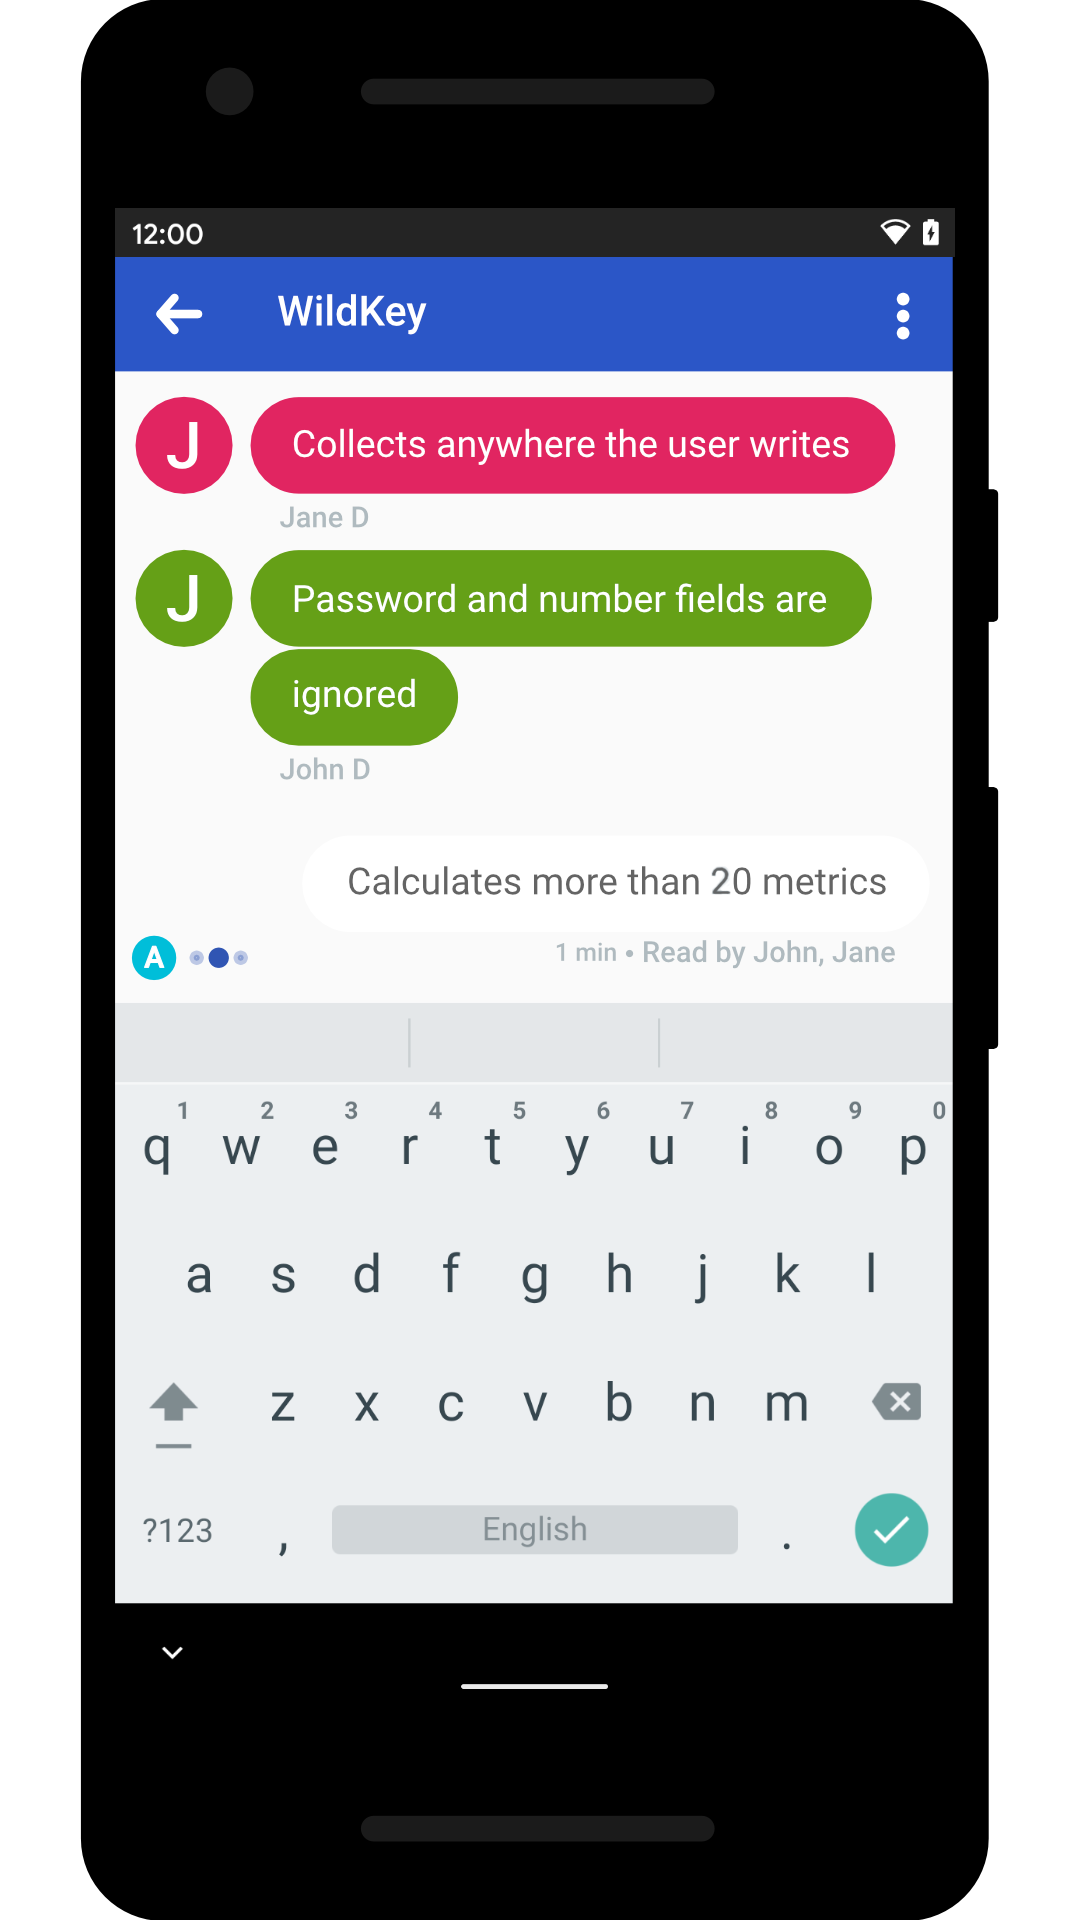 Wildkey keyboard on a standard chat application with the messages. Collects anywhere the user writes. Password and number fields are ignored. Calculates over 20 metrics.